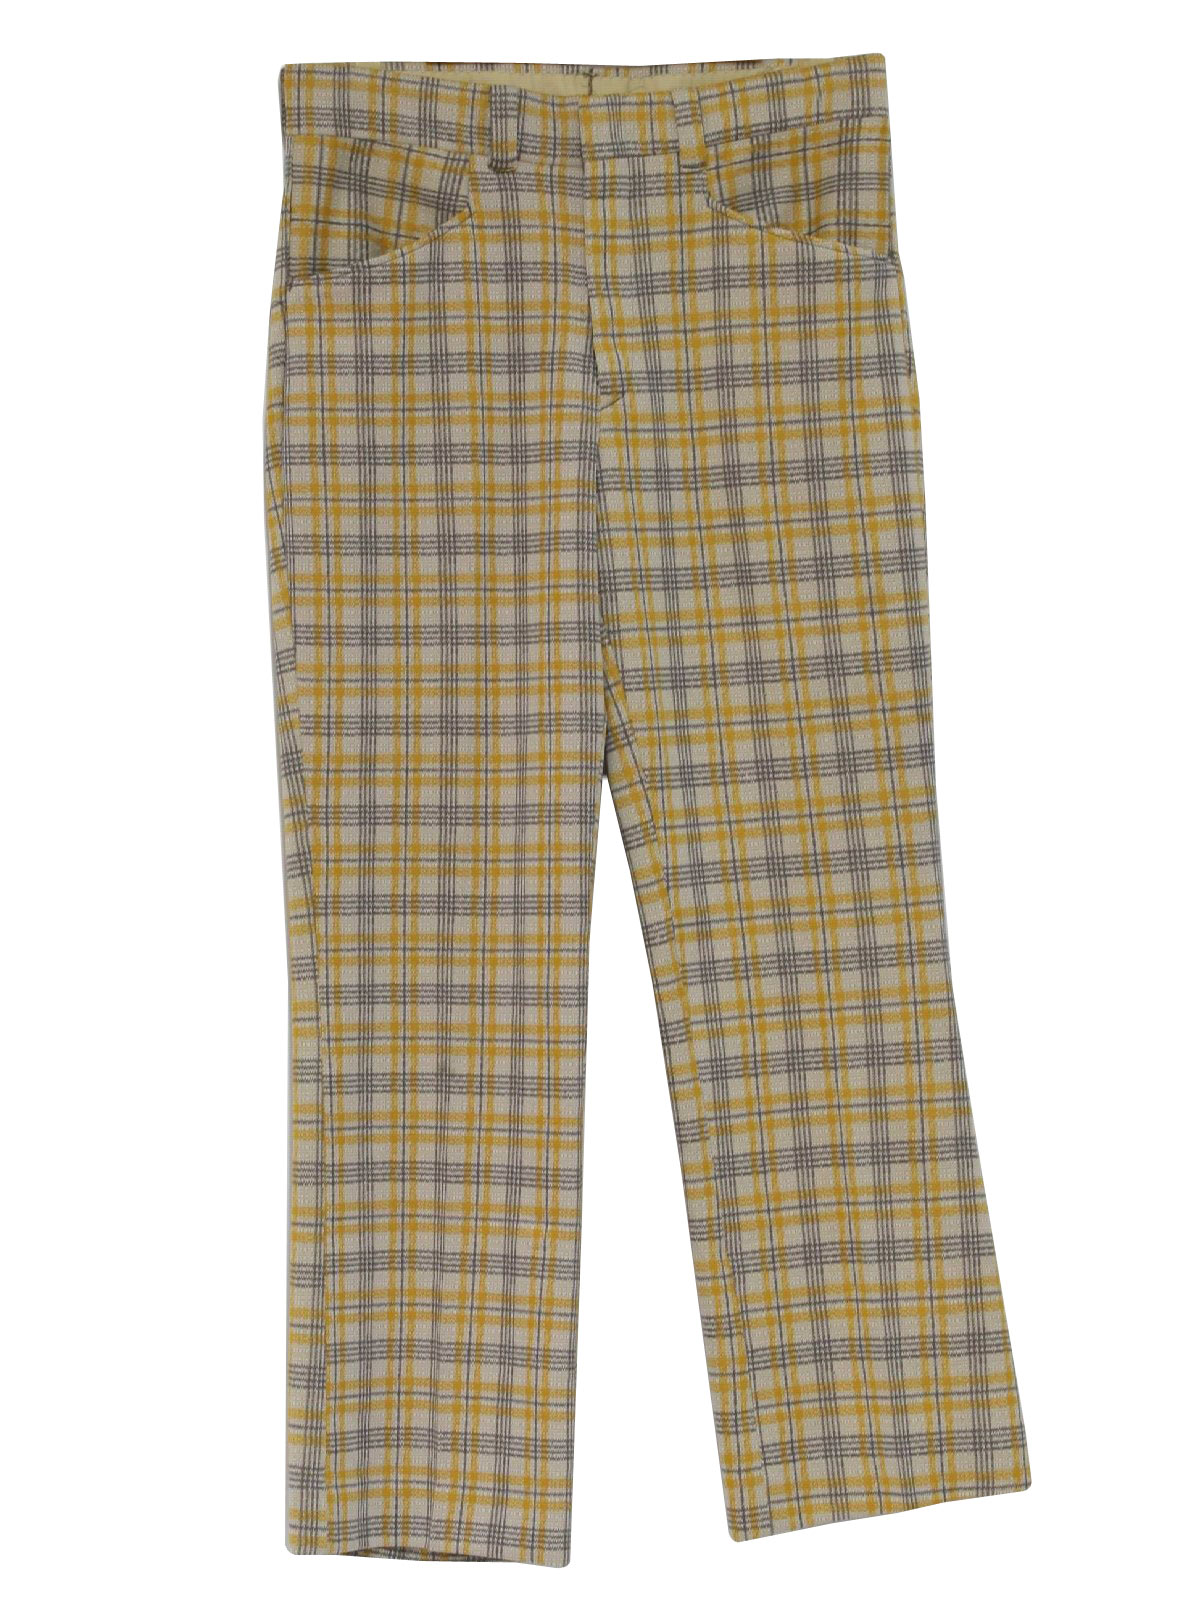 1970's Retro Flared Pants / Flares: 70s -Care Label- Mens yellow, off ...